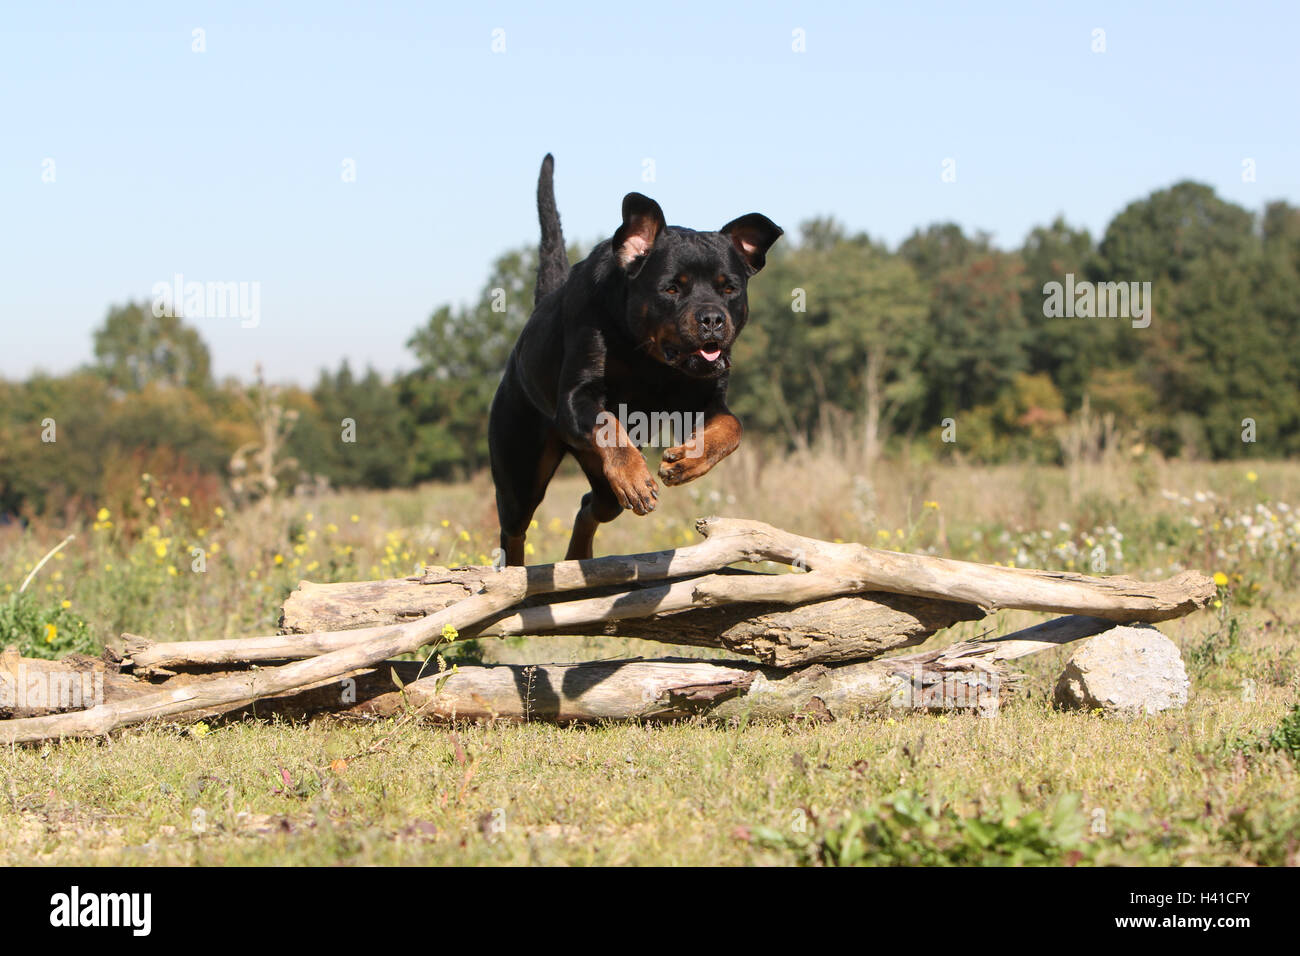 Dog Rottweiler adult jump jumping "to jump" over a wood tree trunk a hurdle an obstacle agile agility nimble in move moving Stock Photo